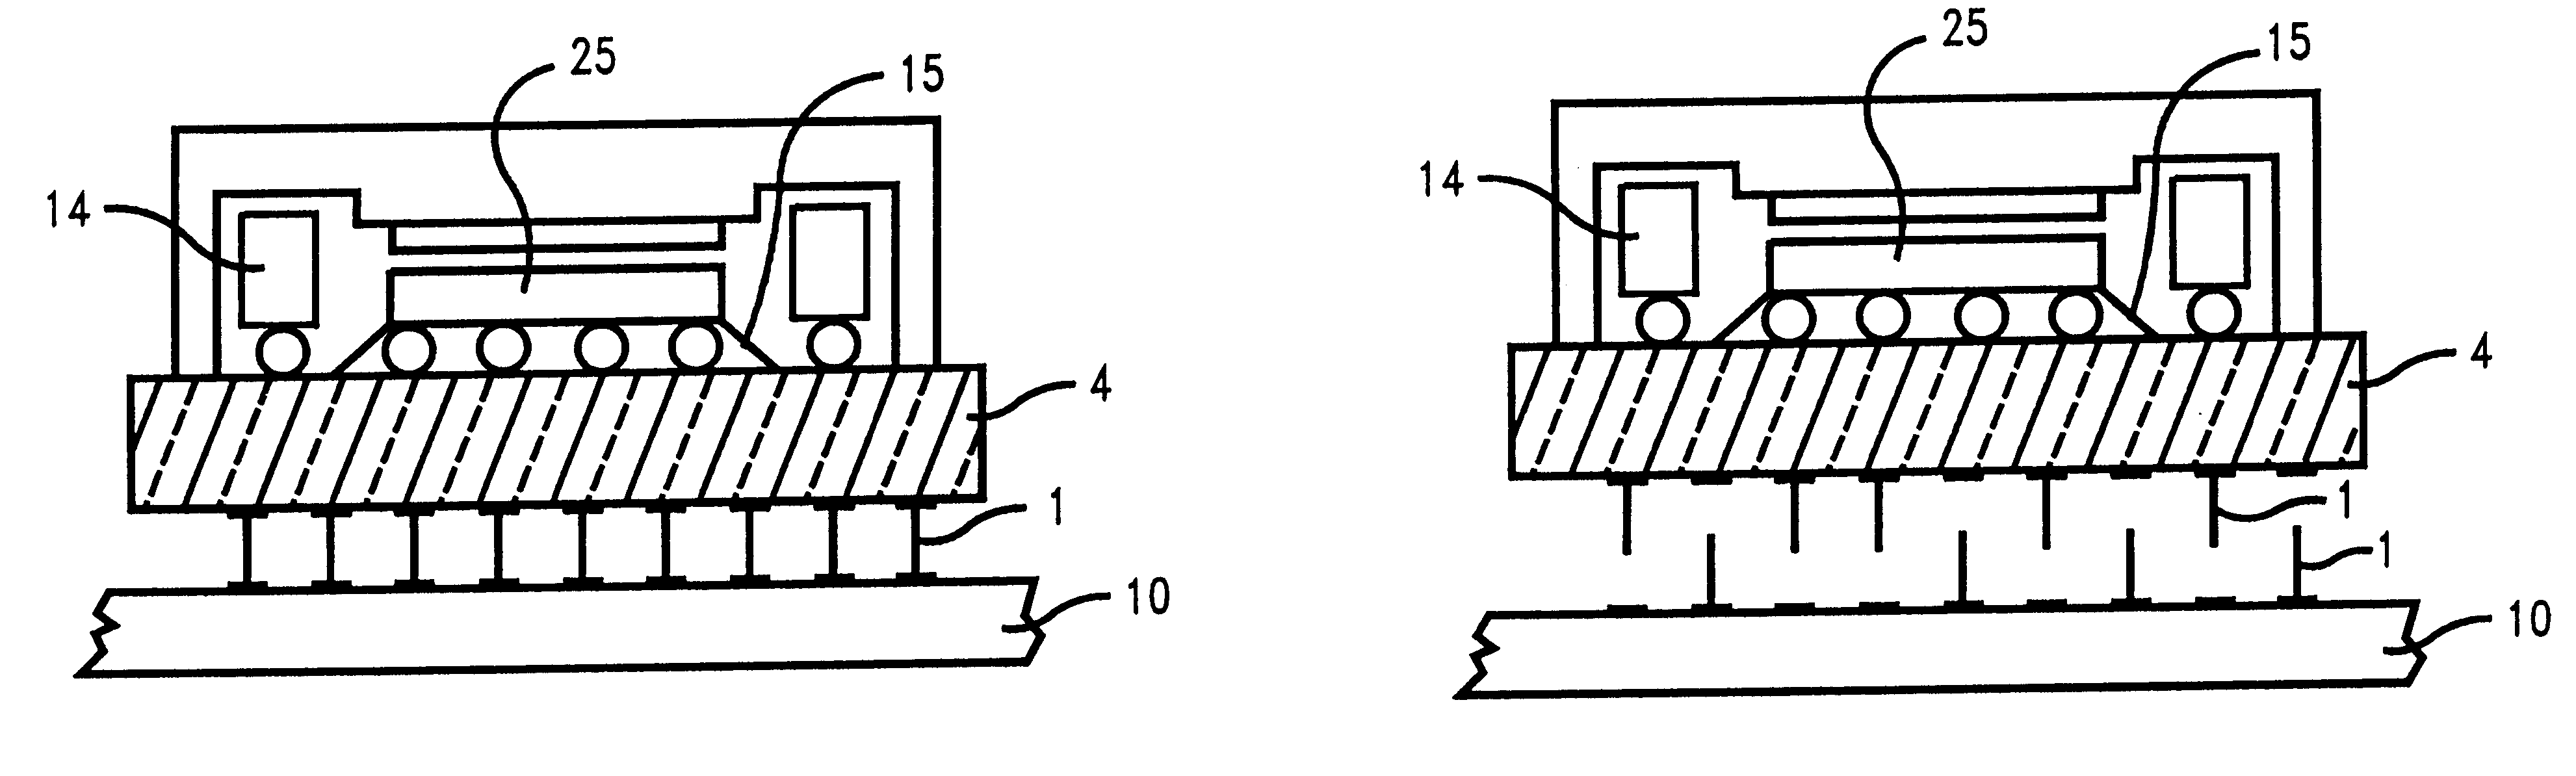 Interconnection structure and process module assembly and rework